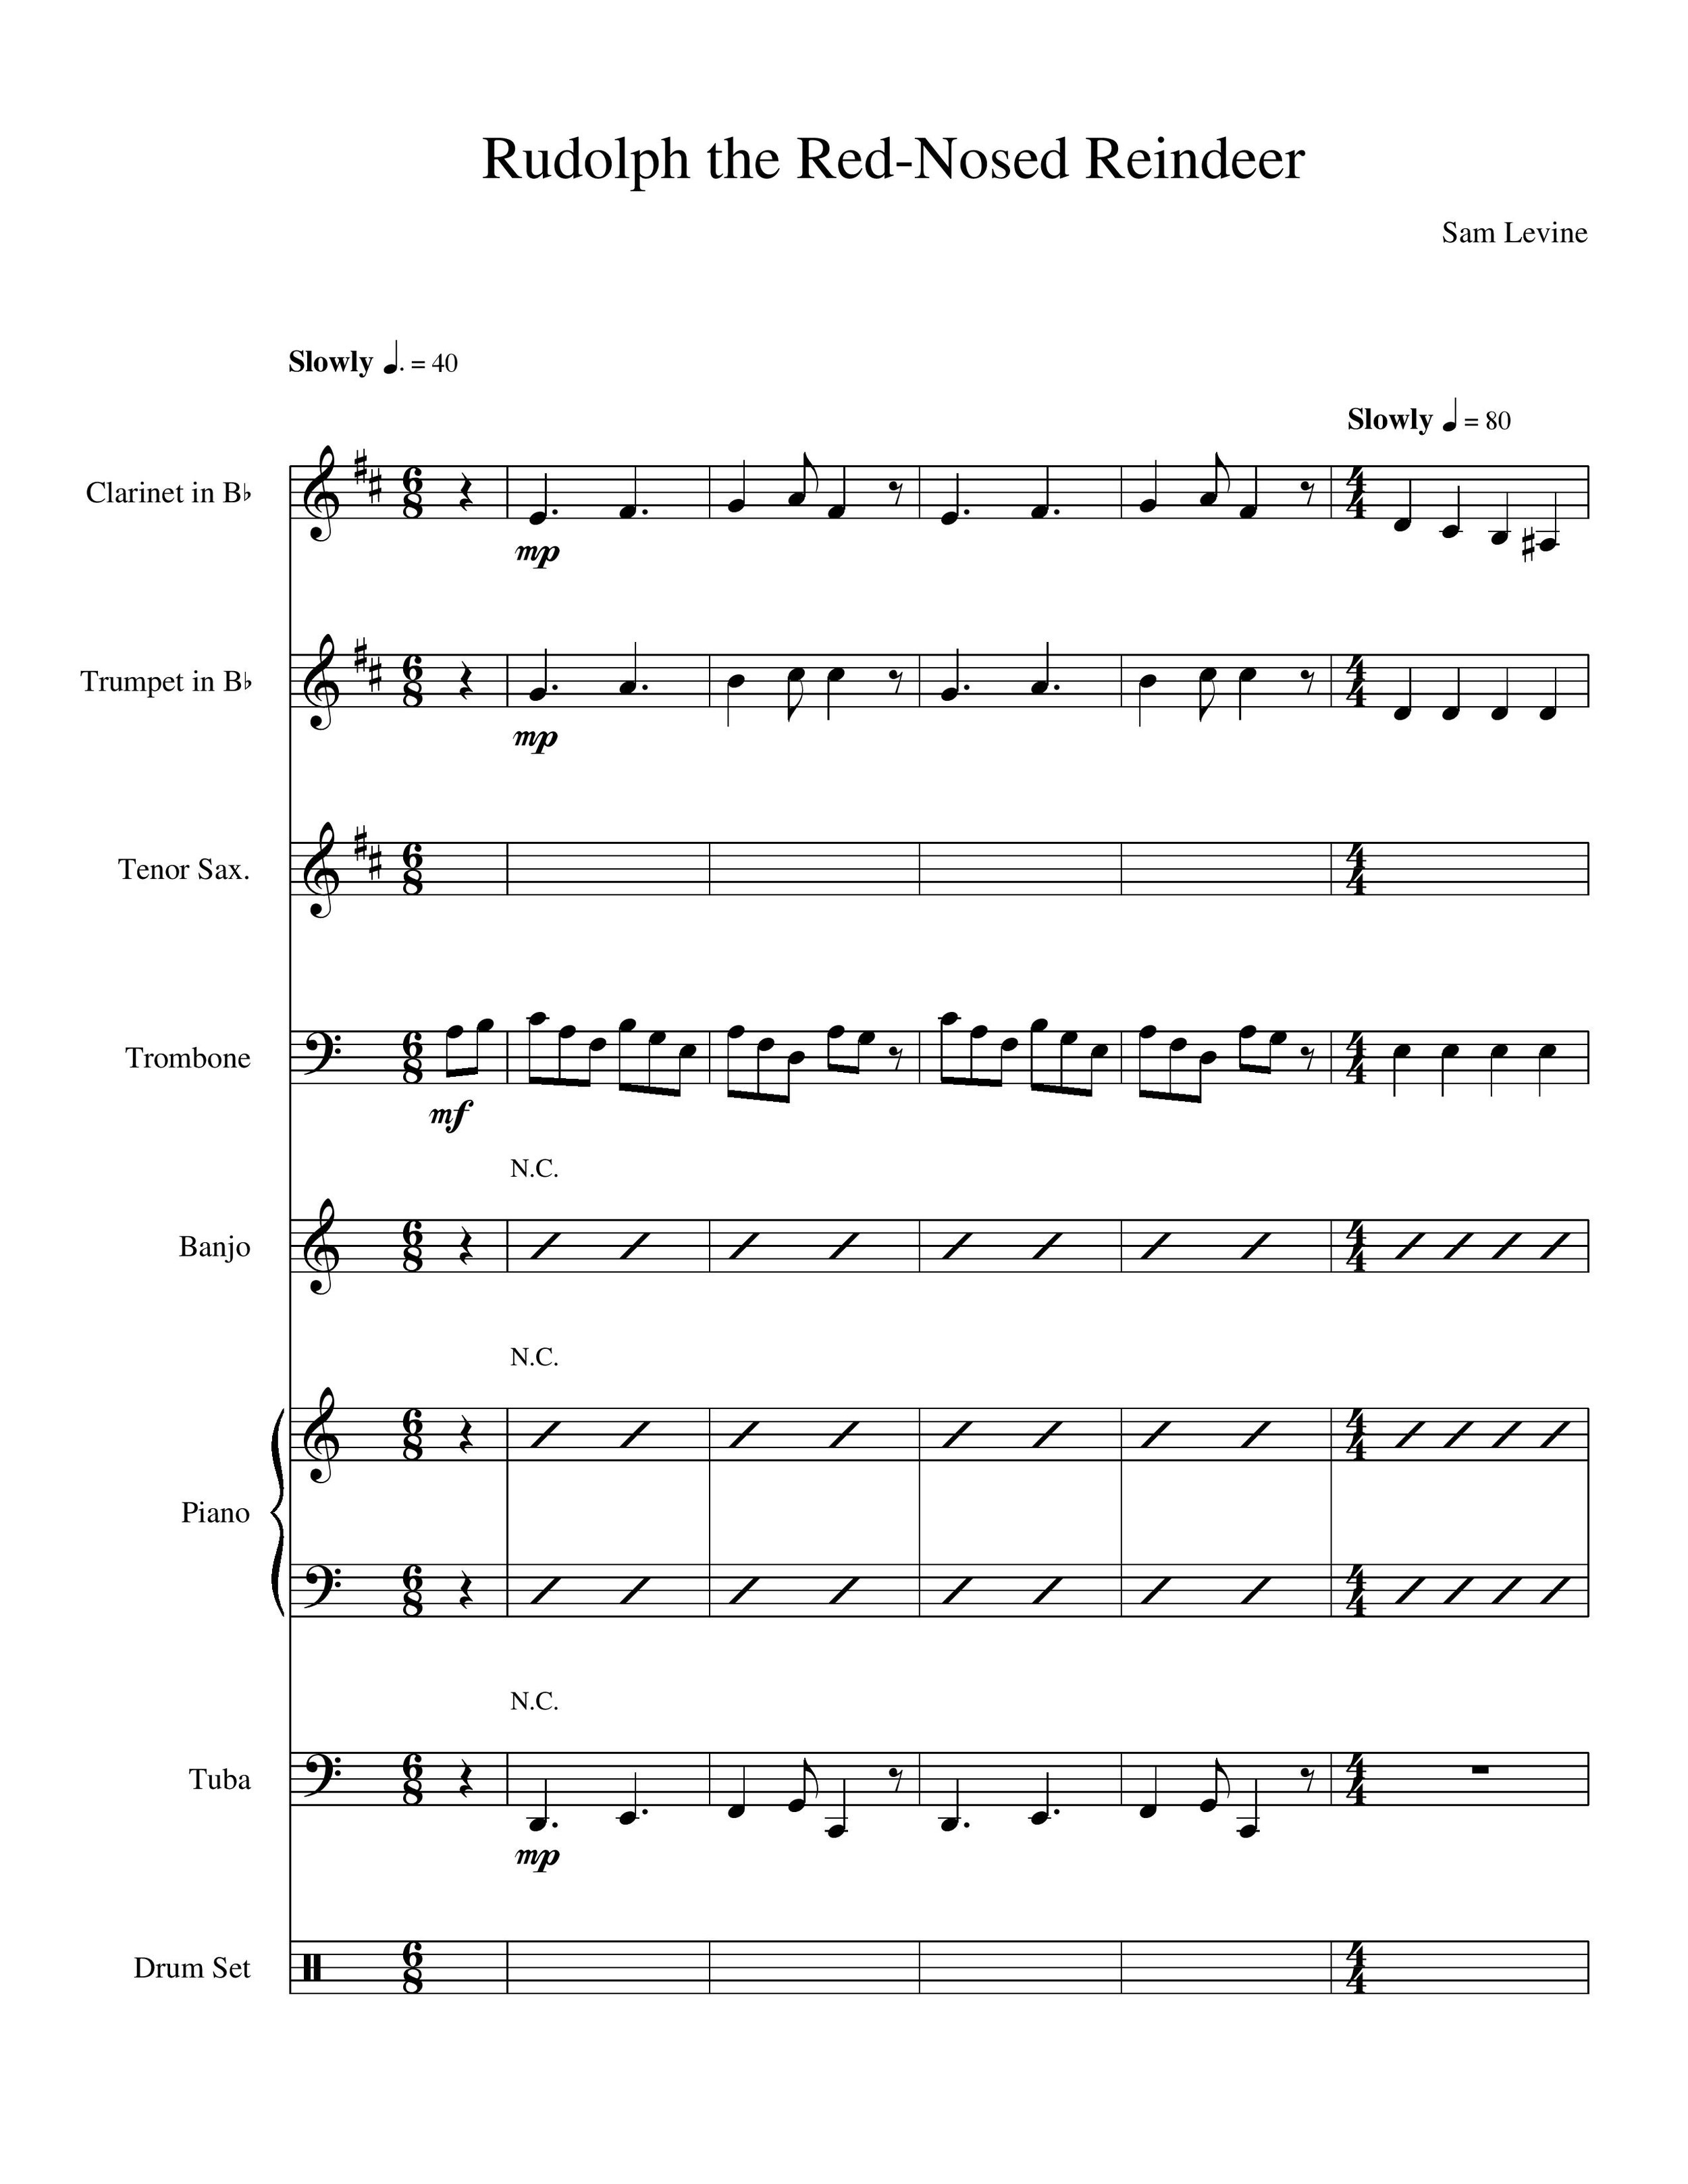 Rudolph the Red-Nosed Reindeer - Score_01.jpg